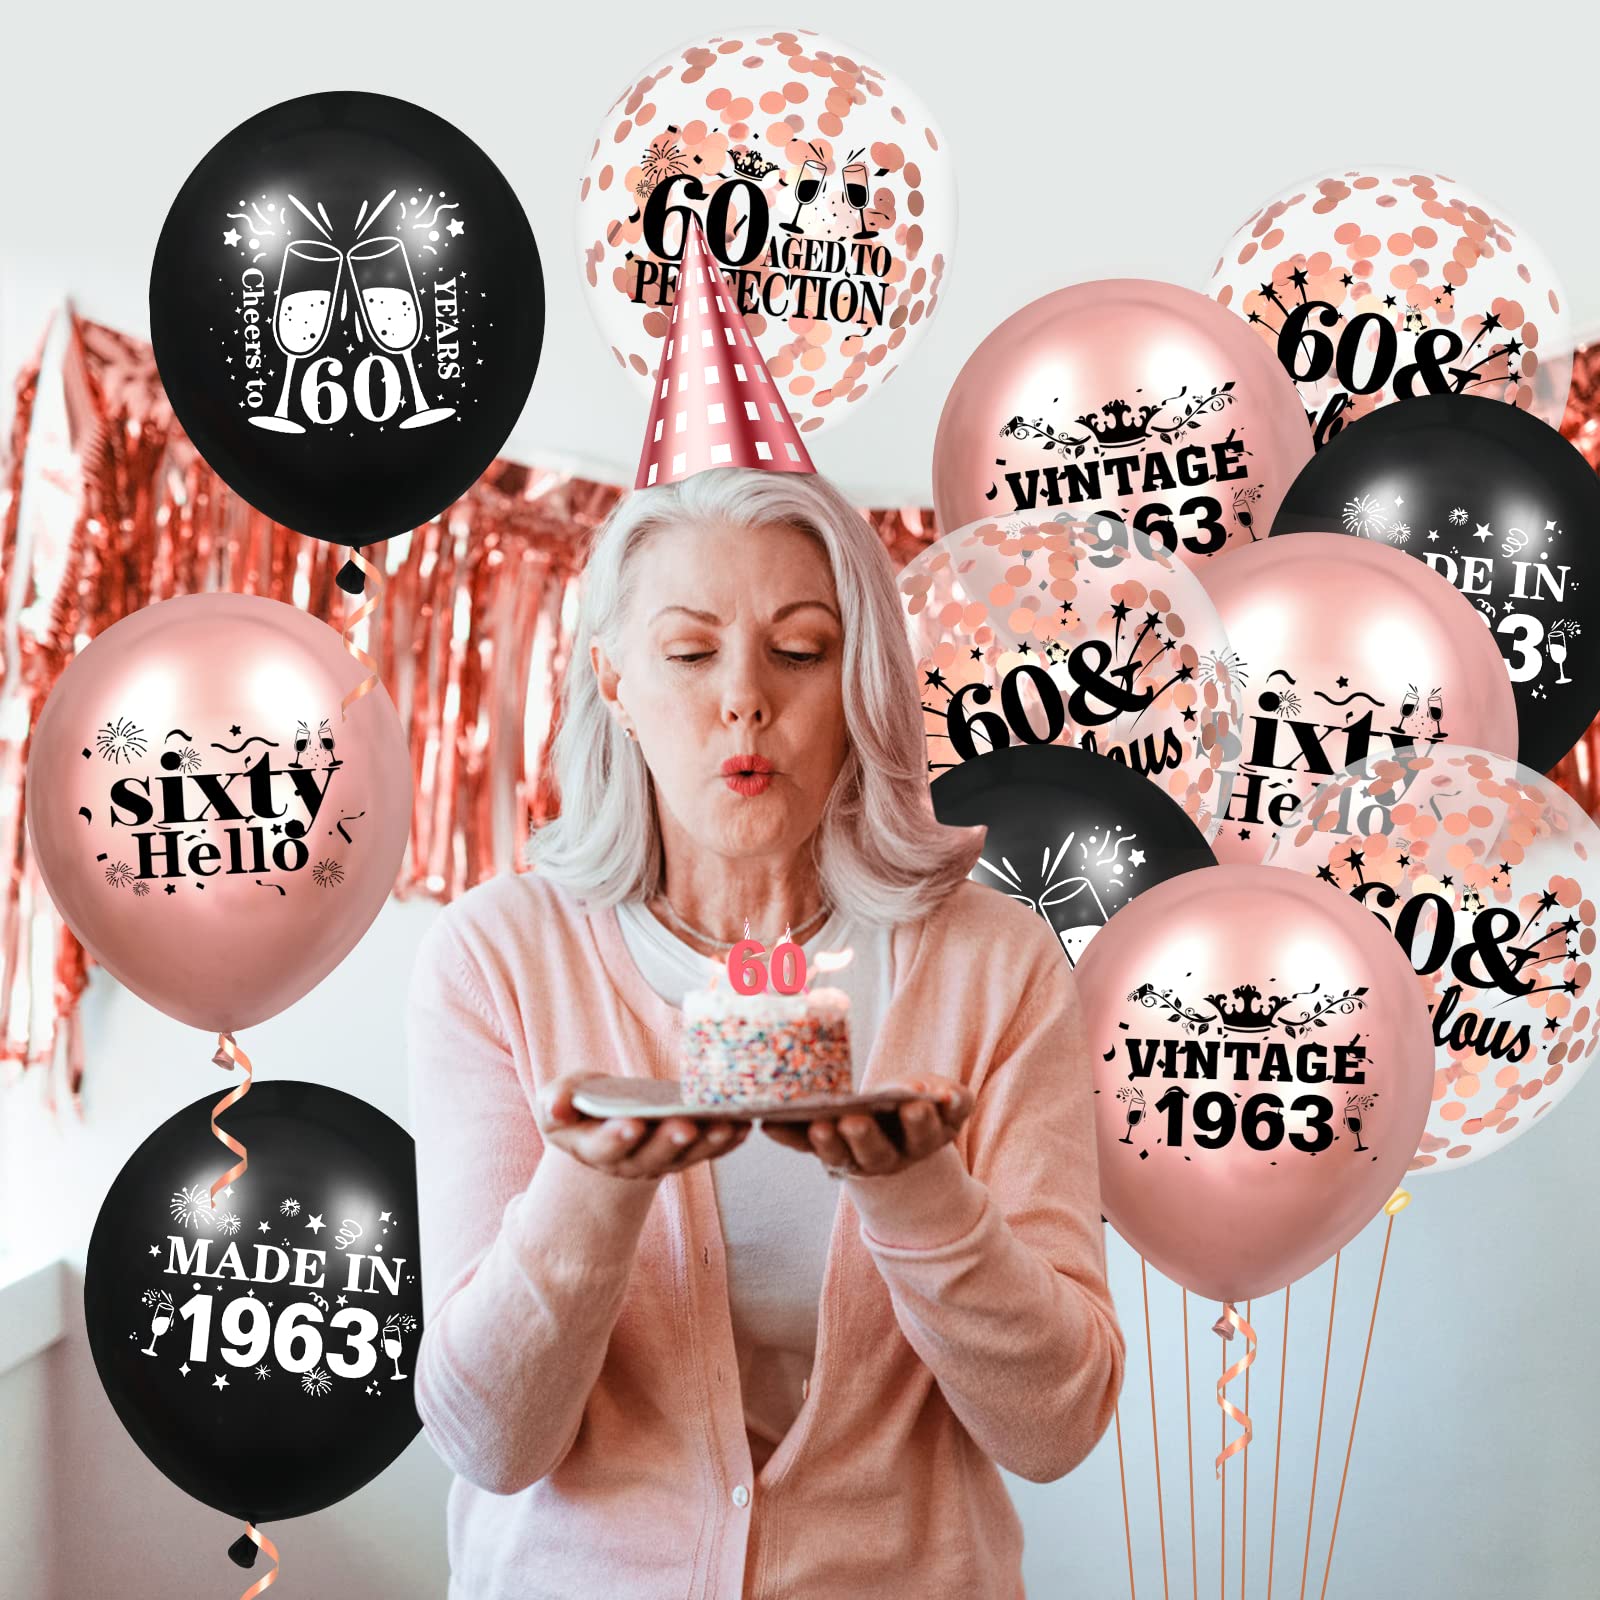 60th Birthday Balloons 18Pcs Rose Gold and Black 1963 Balloons Party Decorations 12 inch Confetti Latex Balloons Birthday Party Supplies for Women Vintage Balloons for 60th Birthday Anniversary Party